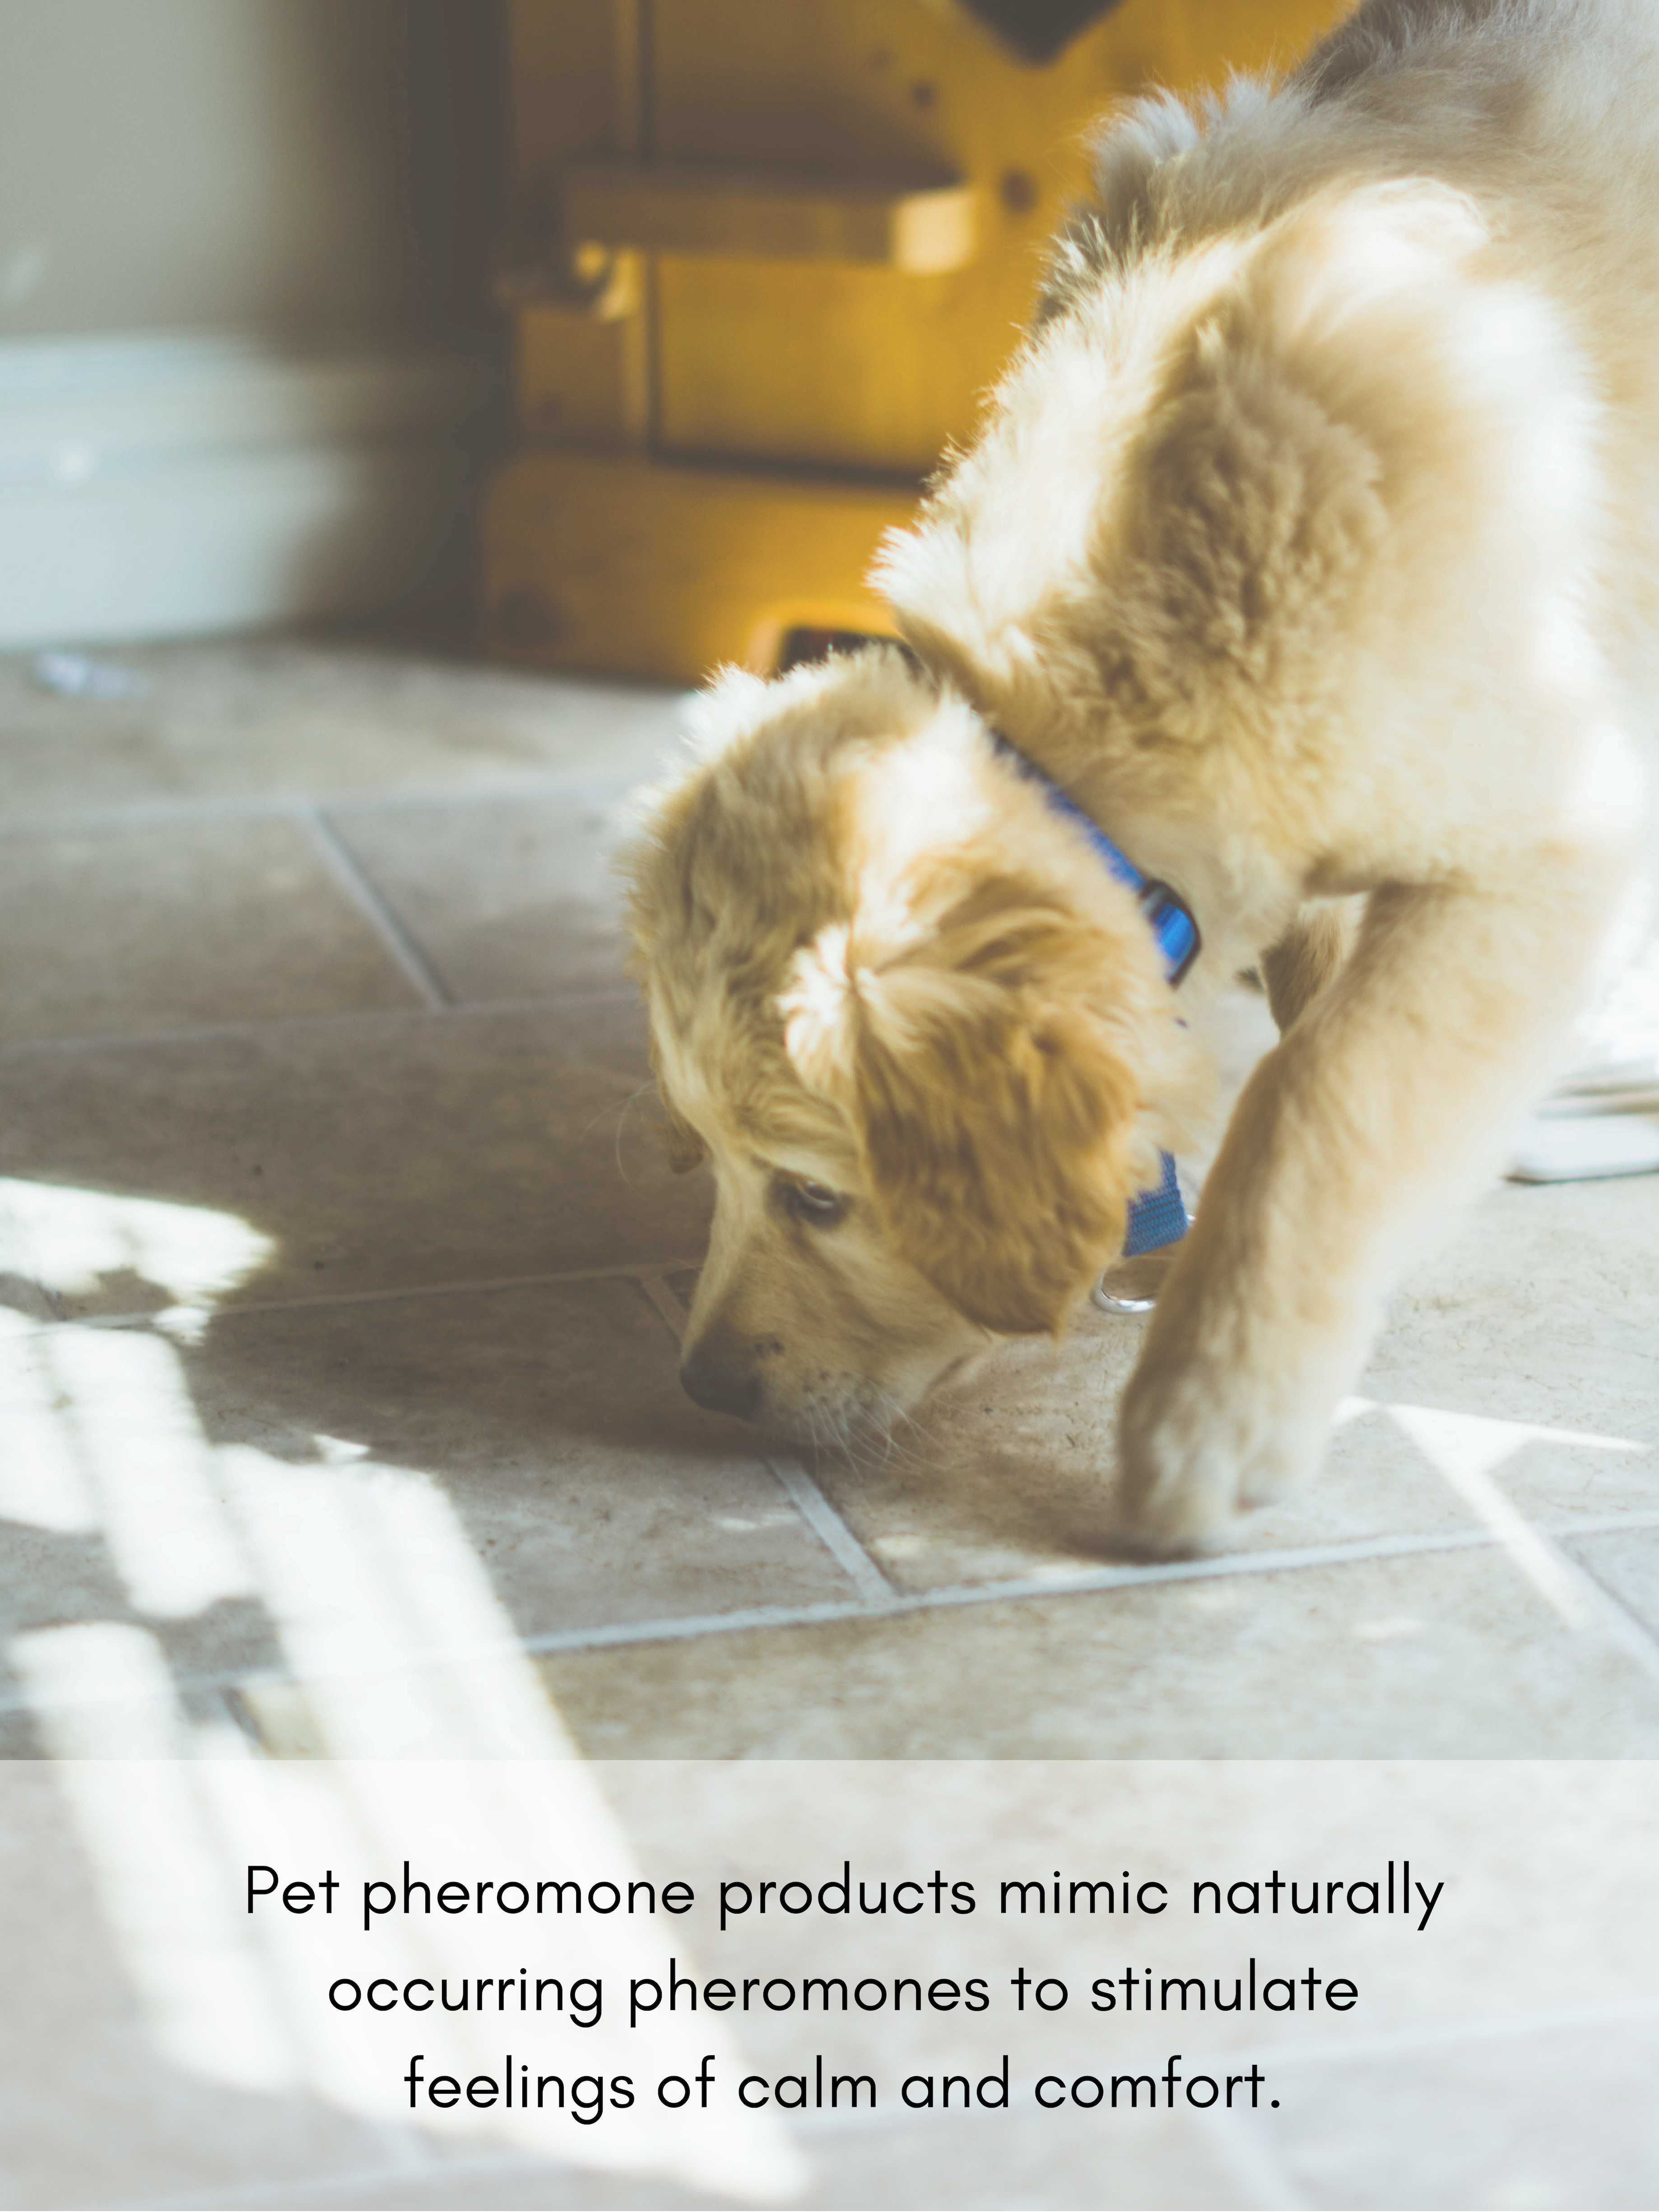 Pet pheromone products mimic naturally occurring pheromones to stimulate feelings of calm and comfort.